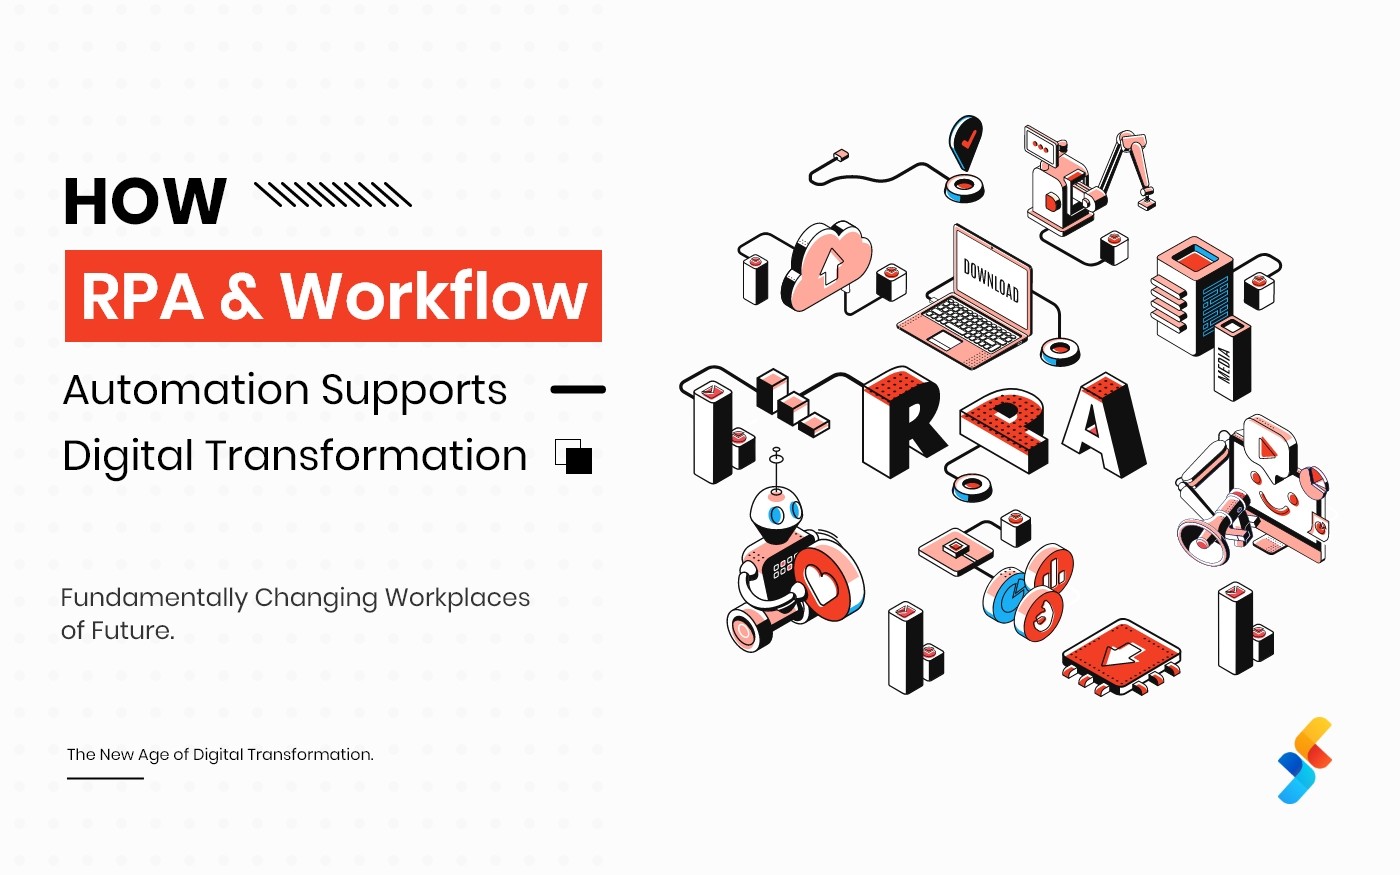 RPA and Workflow Automation: The Key Elements in Driving Digital Transformation